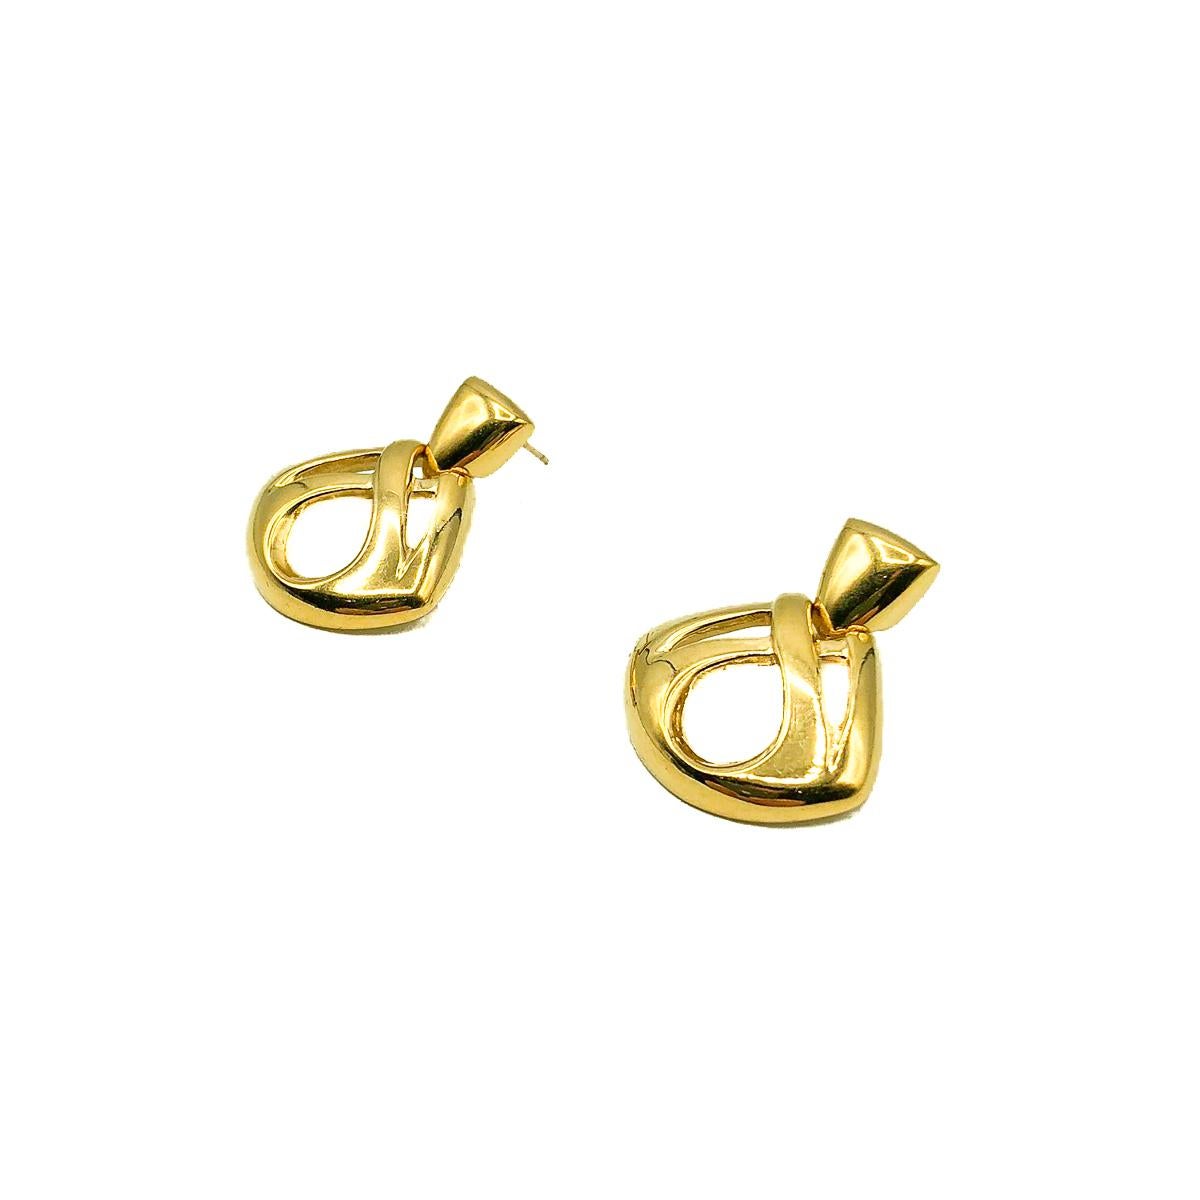 Vintage Givenchy Infinity Earrings. One of the late great 20th century couturiers, Hubert de Givenchy founded his namesake fashion house in 1952, destined to leave an indelible mark on fashion history. Famed for disrupting fashion codes of the time